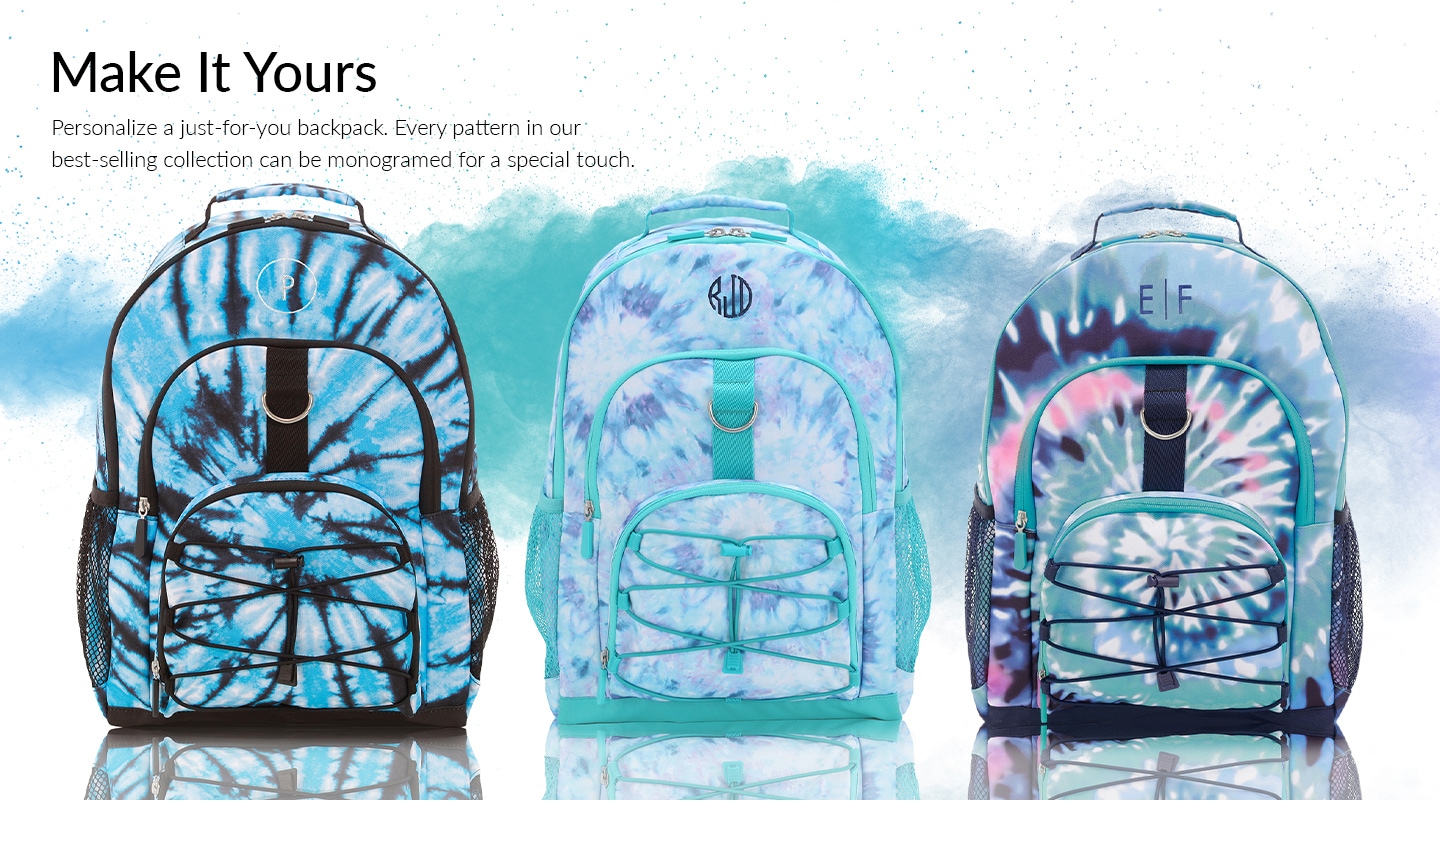 Personalize a just-for-you backpack